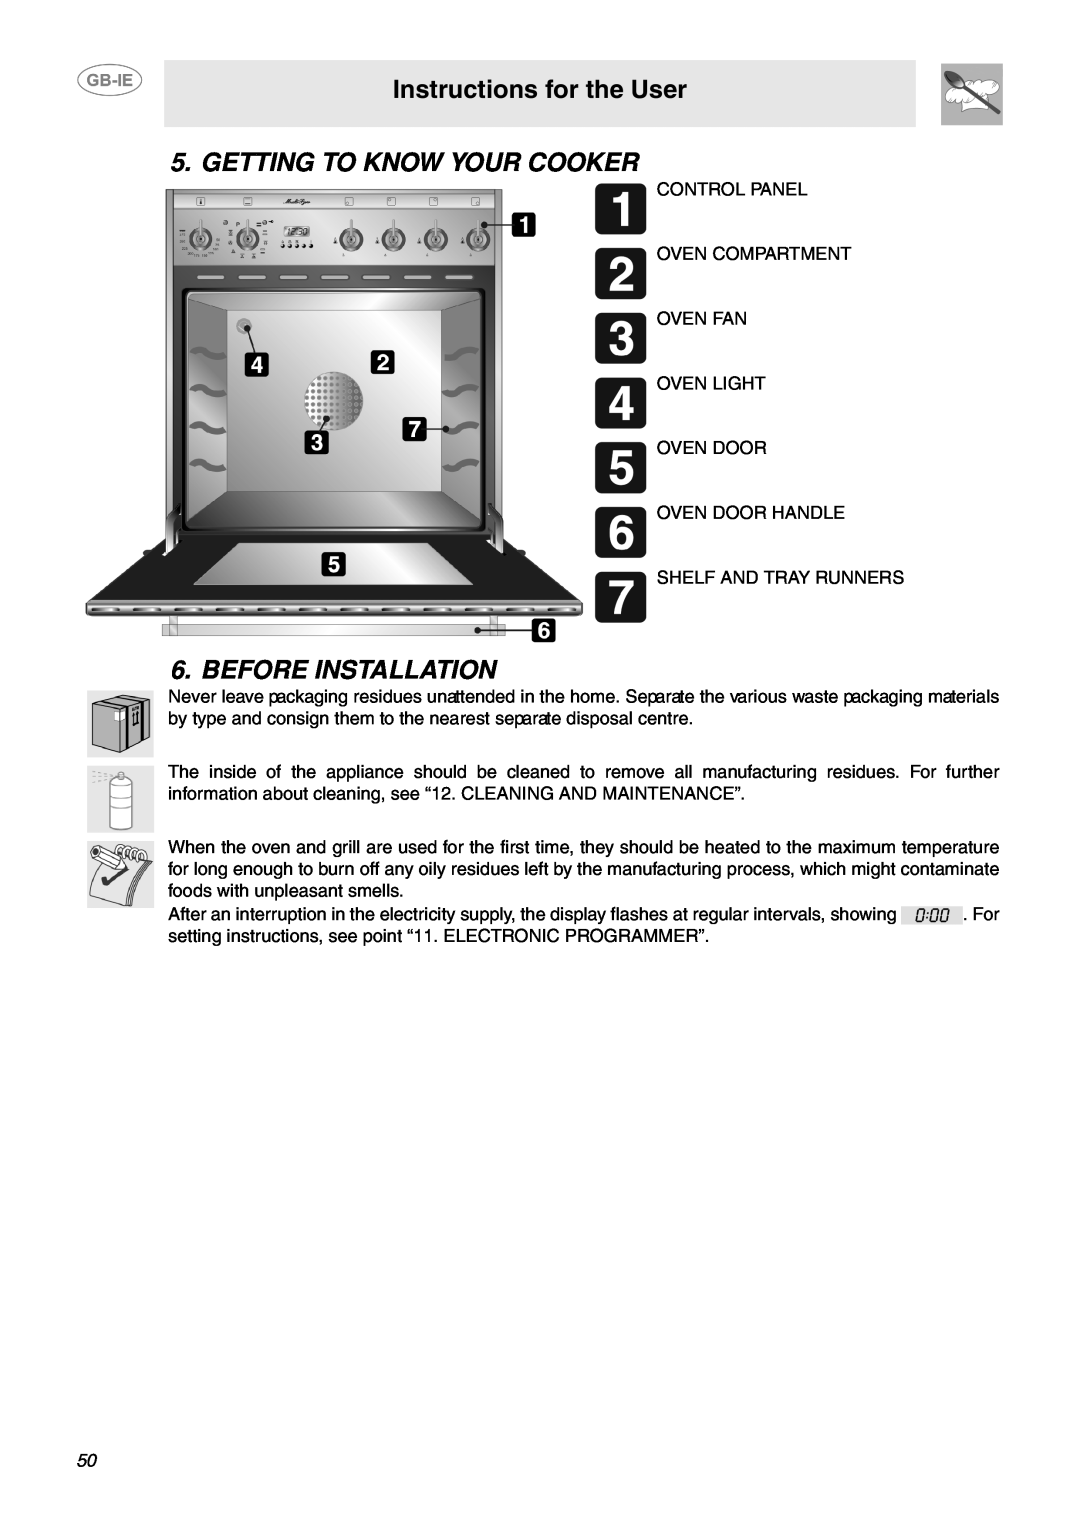 Smeg CP60X6 manual Instructions for the User, Getting To Know Your Cooker, Before Installation 